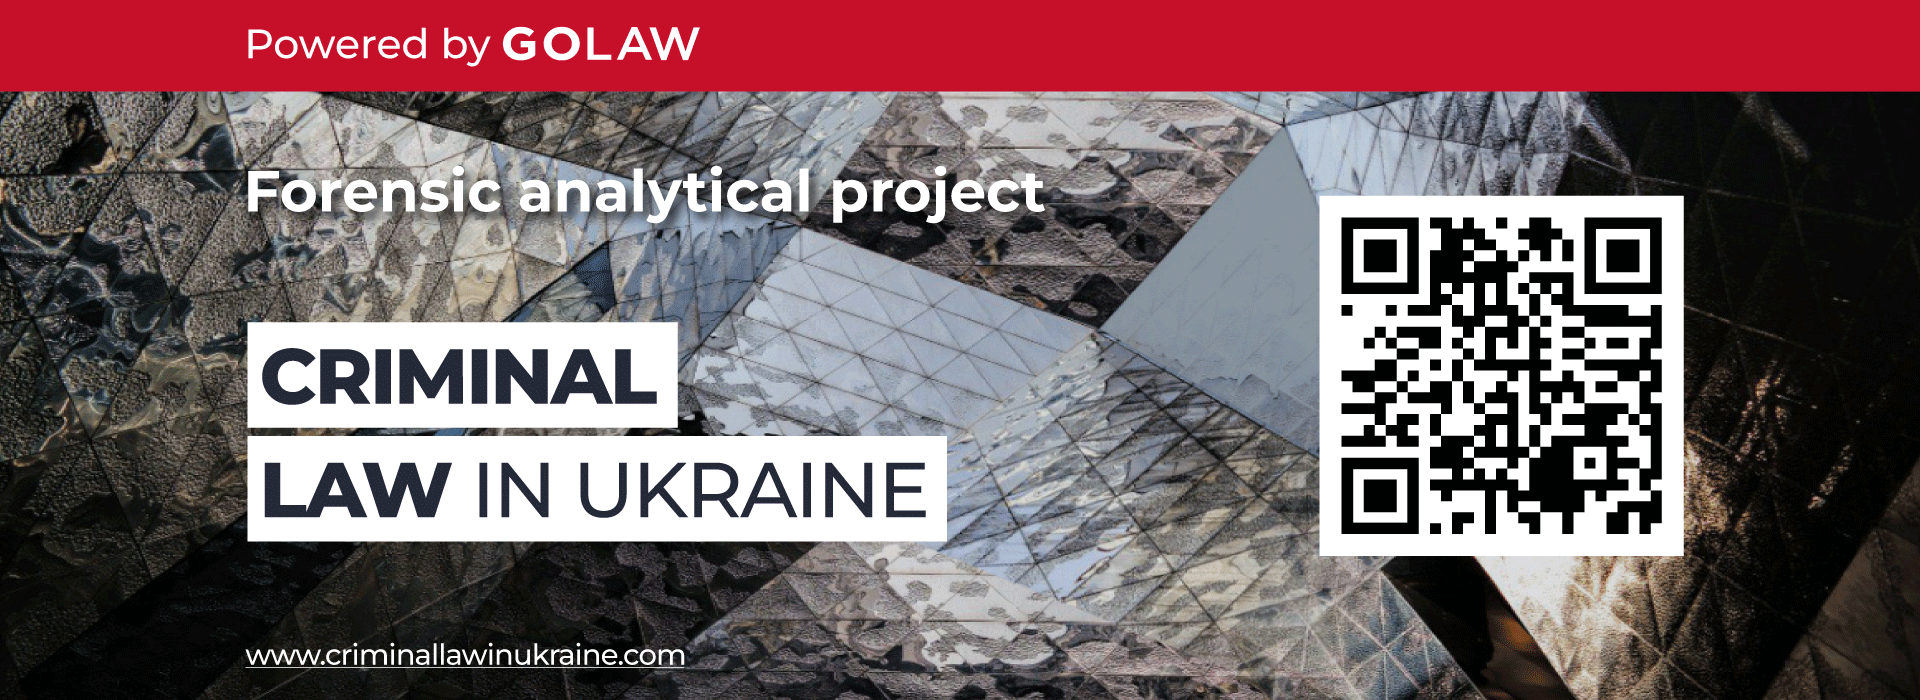 GOLAW Announces the Launch of the Expert Analytical Project “Criminal Law in Ukraine”